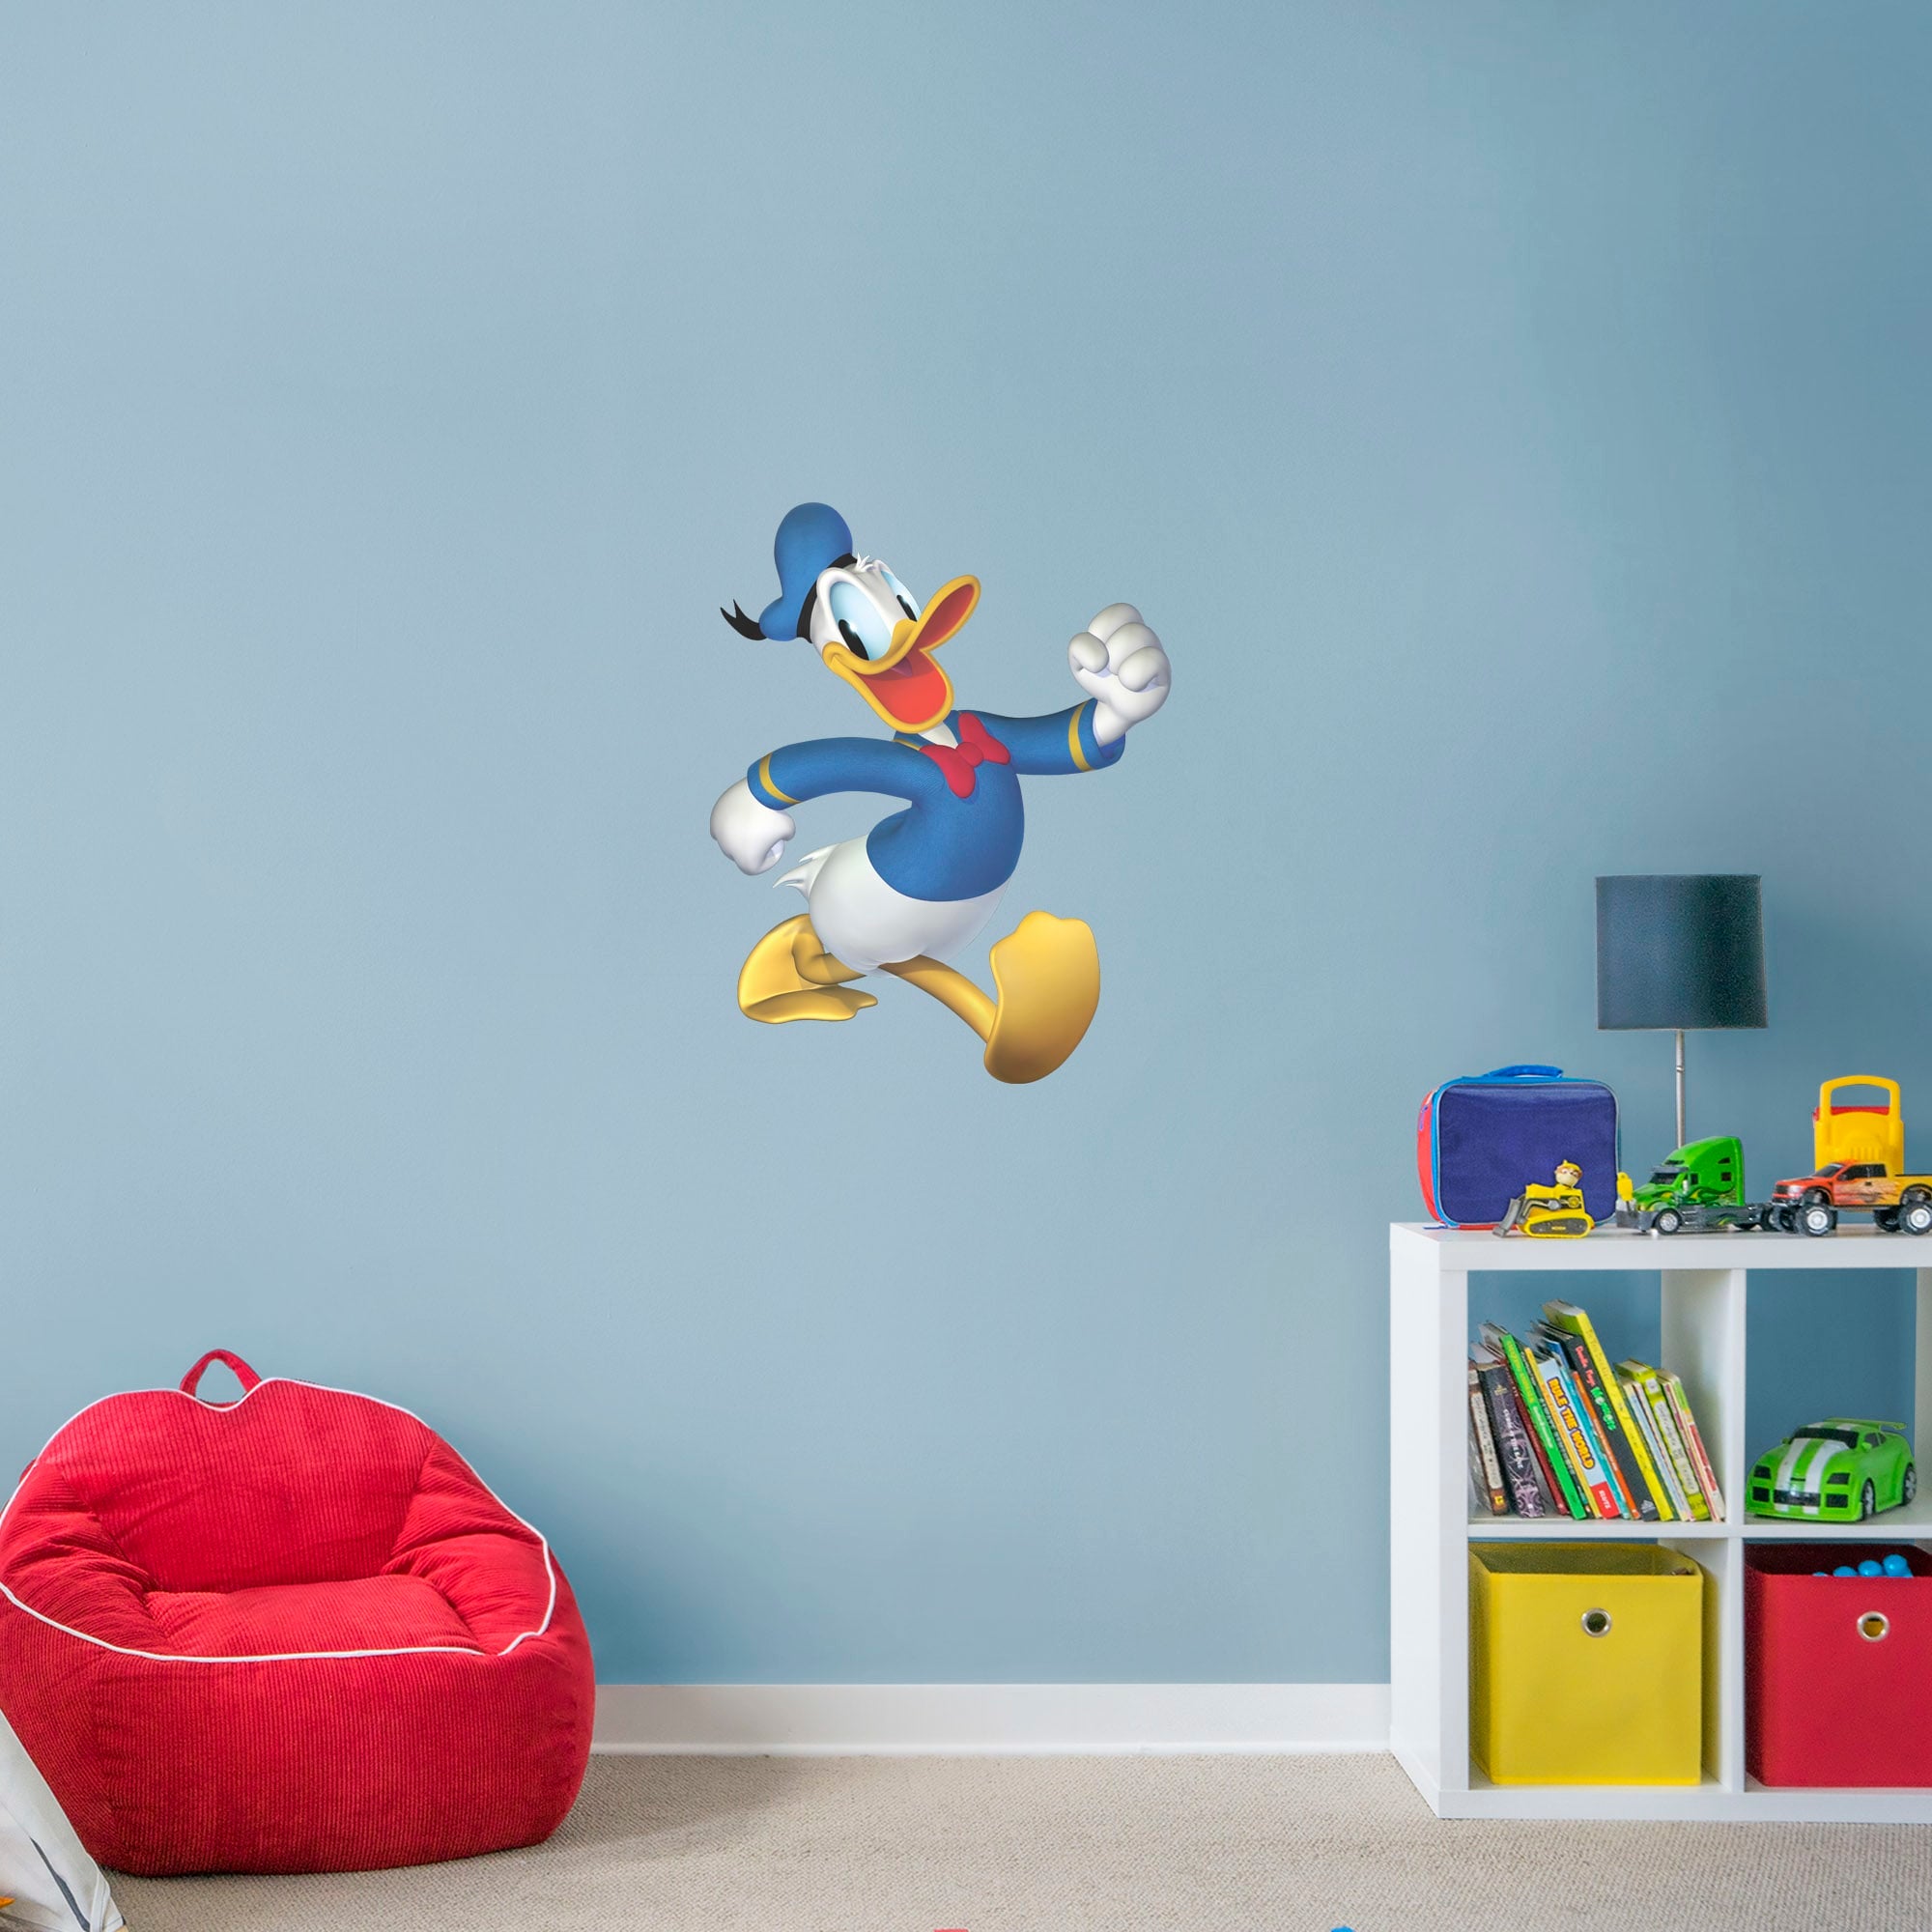 Donald Duck - Officially Licensed Disney Removable Wall Decal XL by Fathead | Vinyl